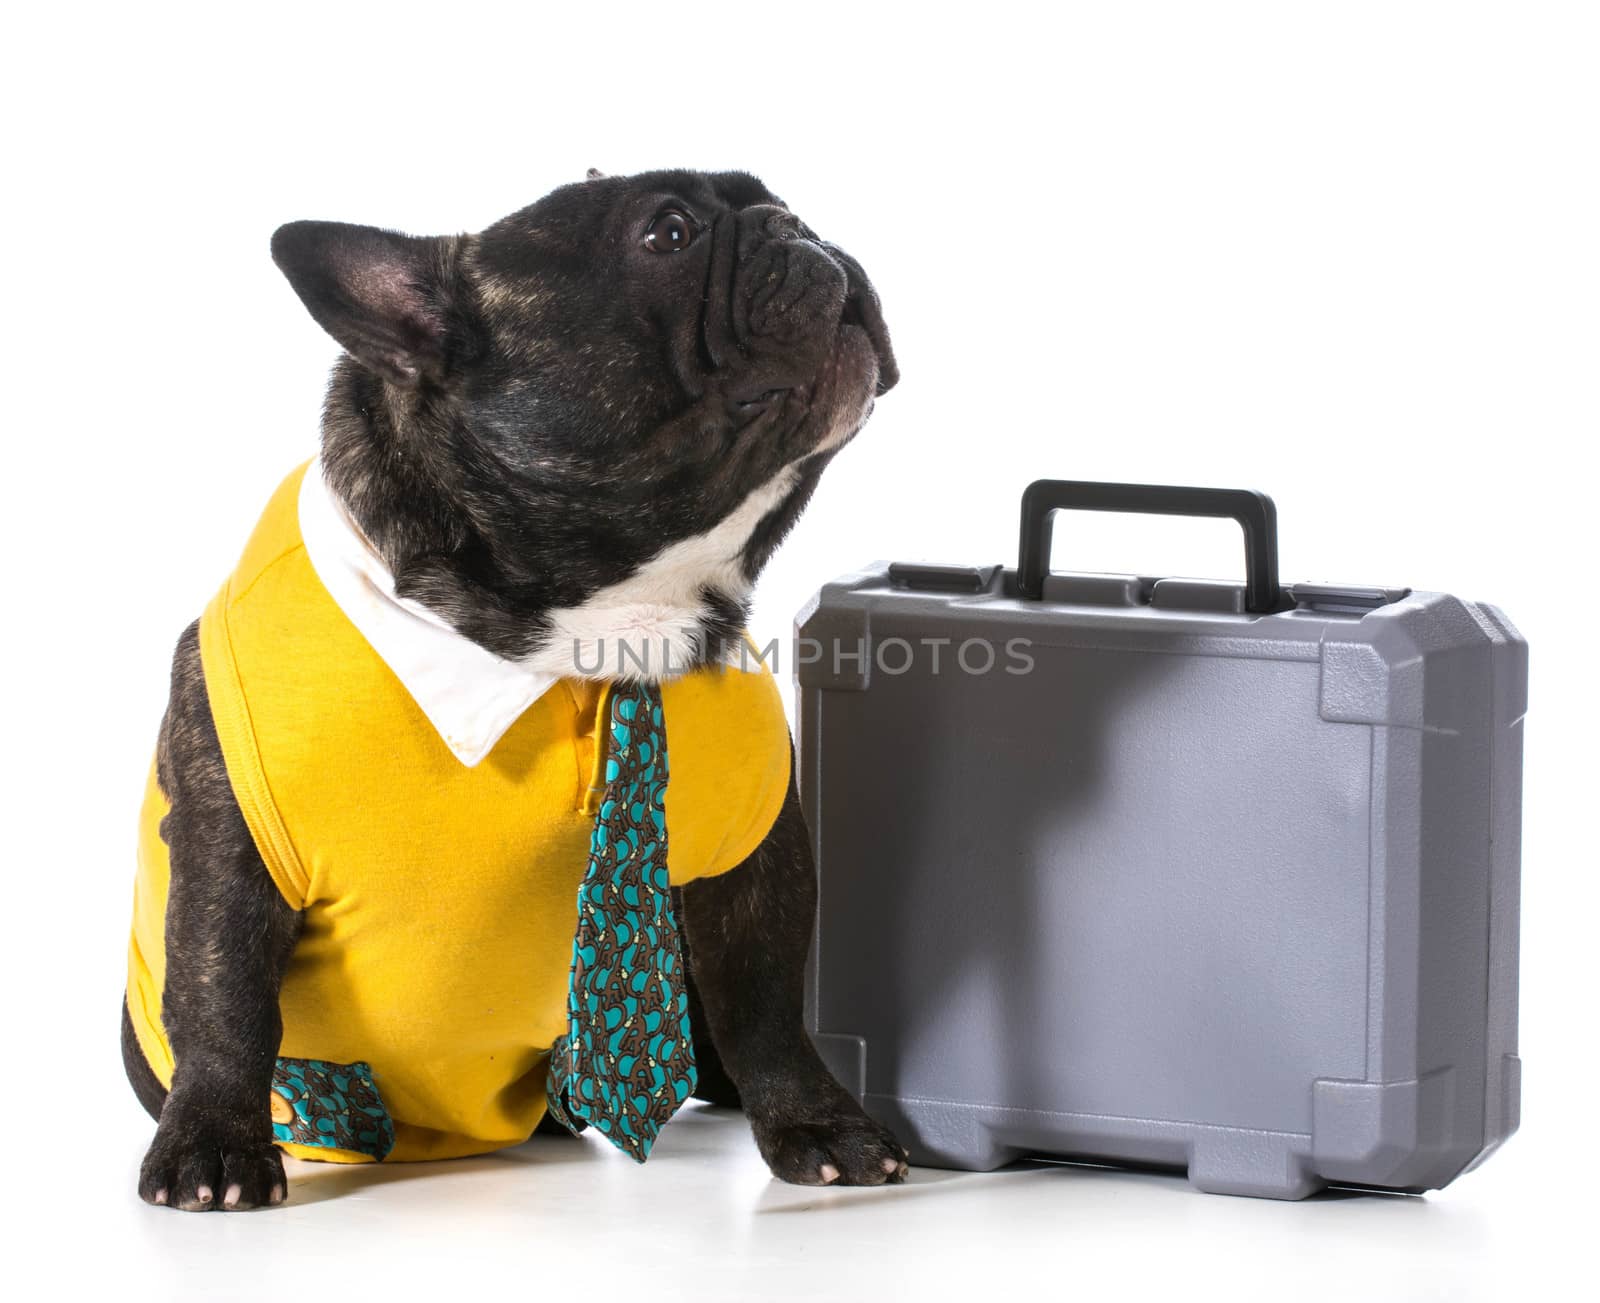 working dog - french bulldog with silly expression sitting beside briefcase